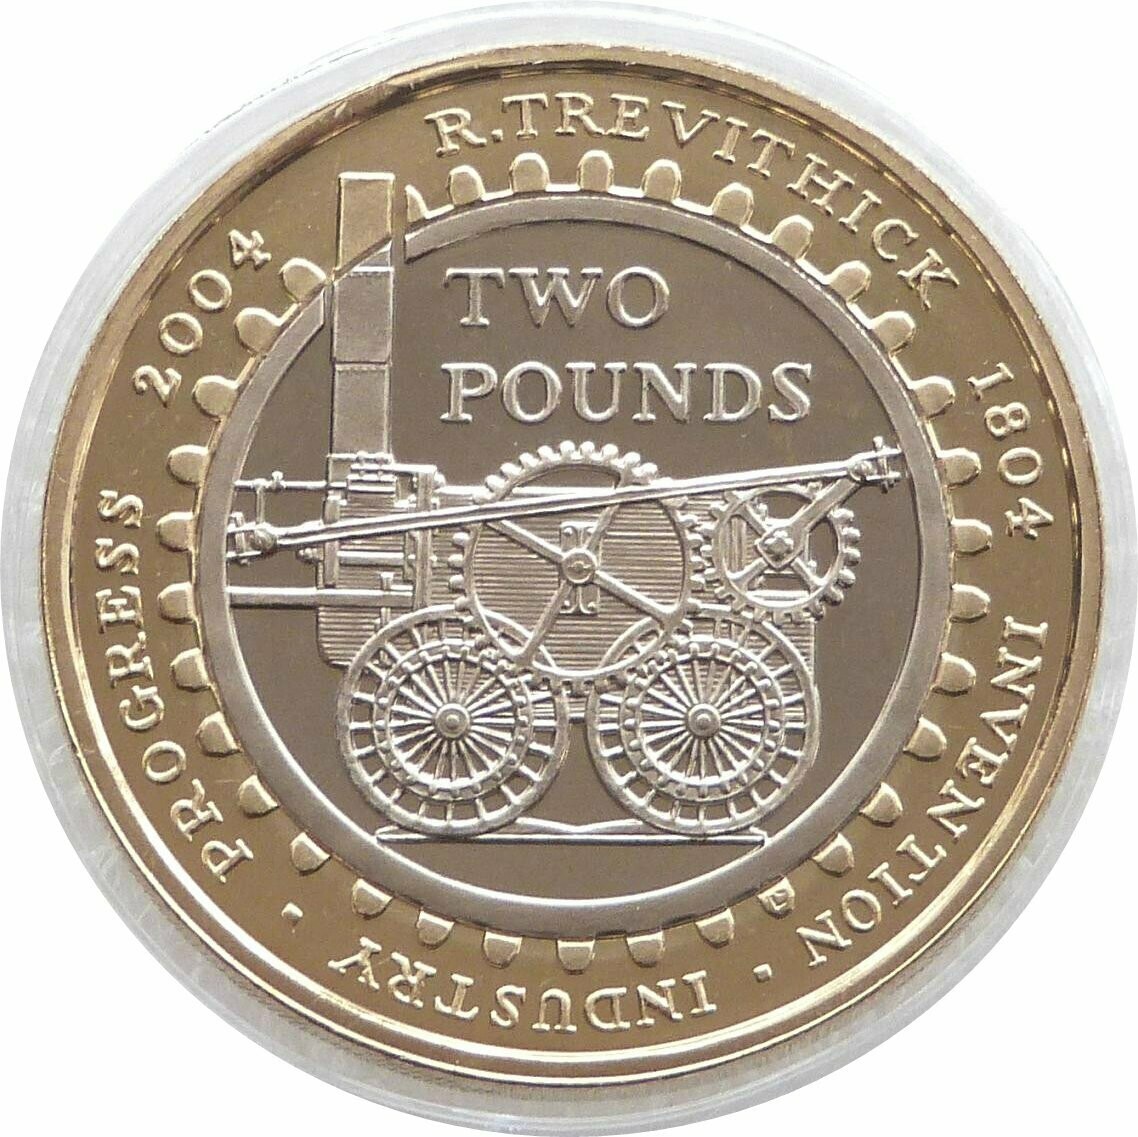 2004 Trevithick Steam Locomotive £2 Proof Coin